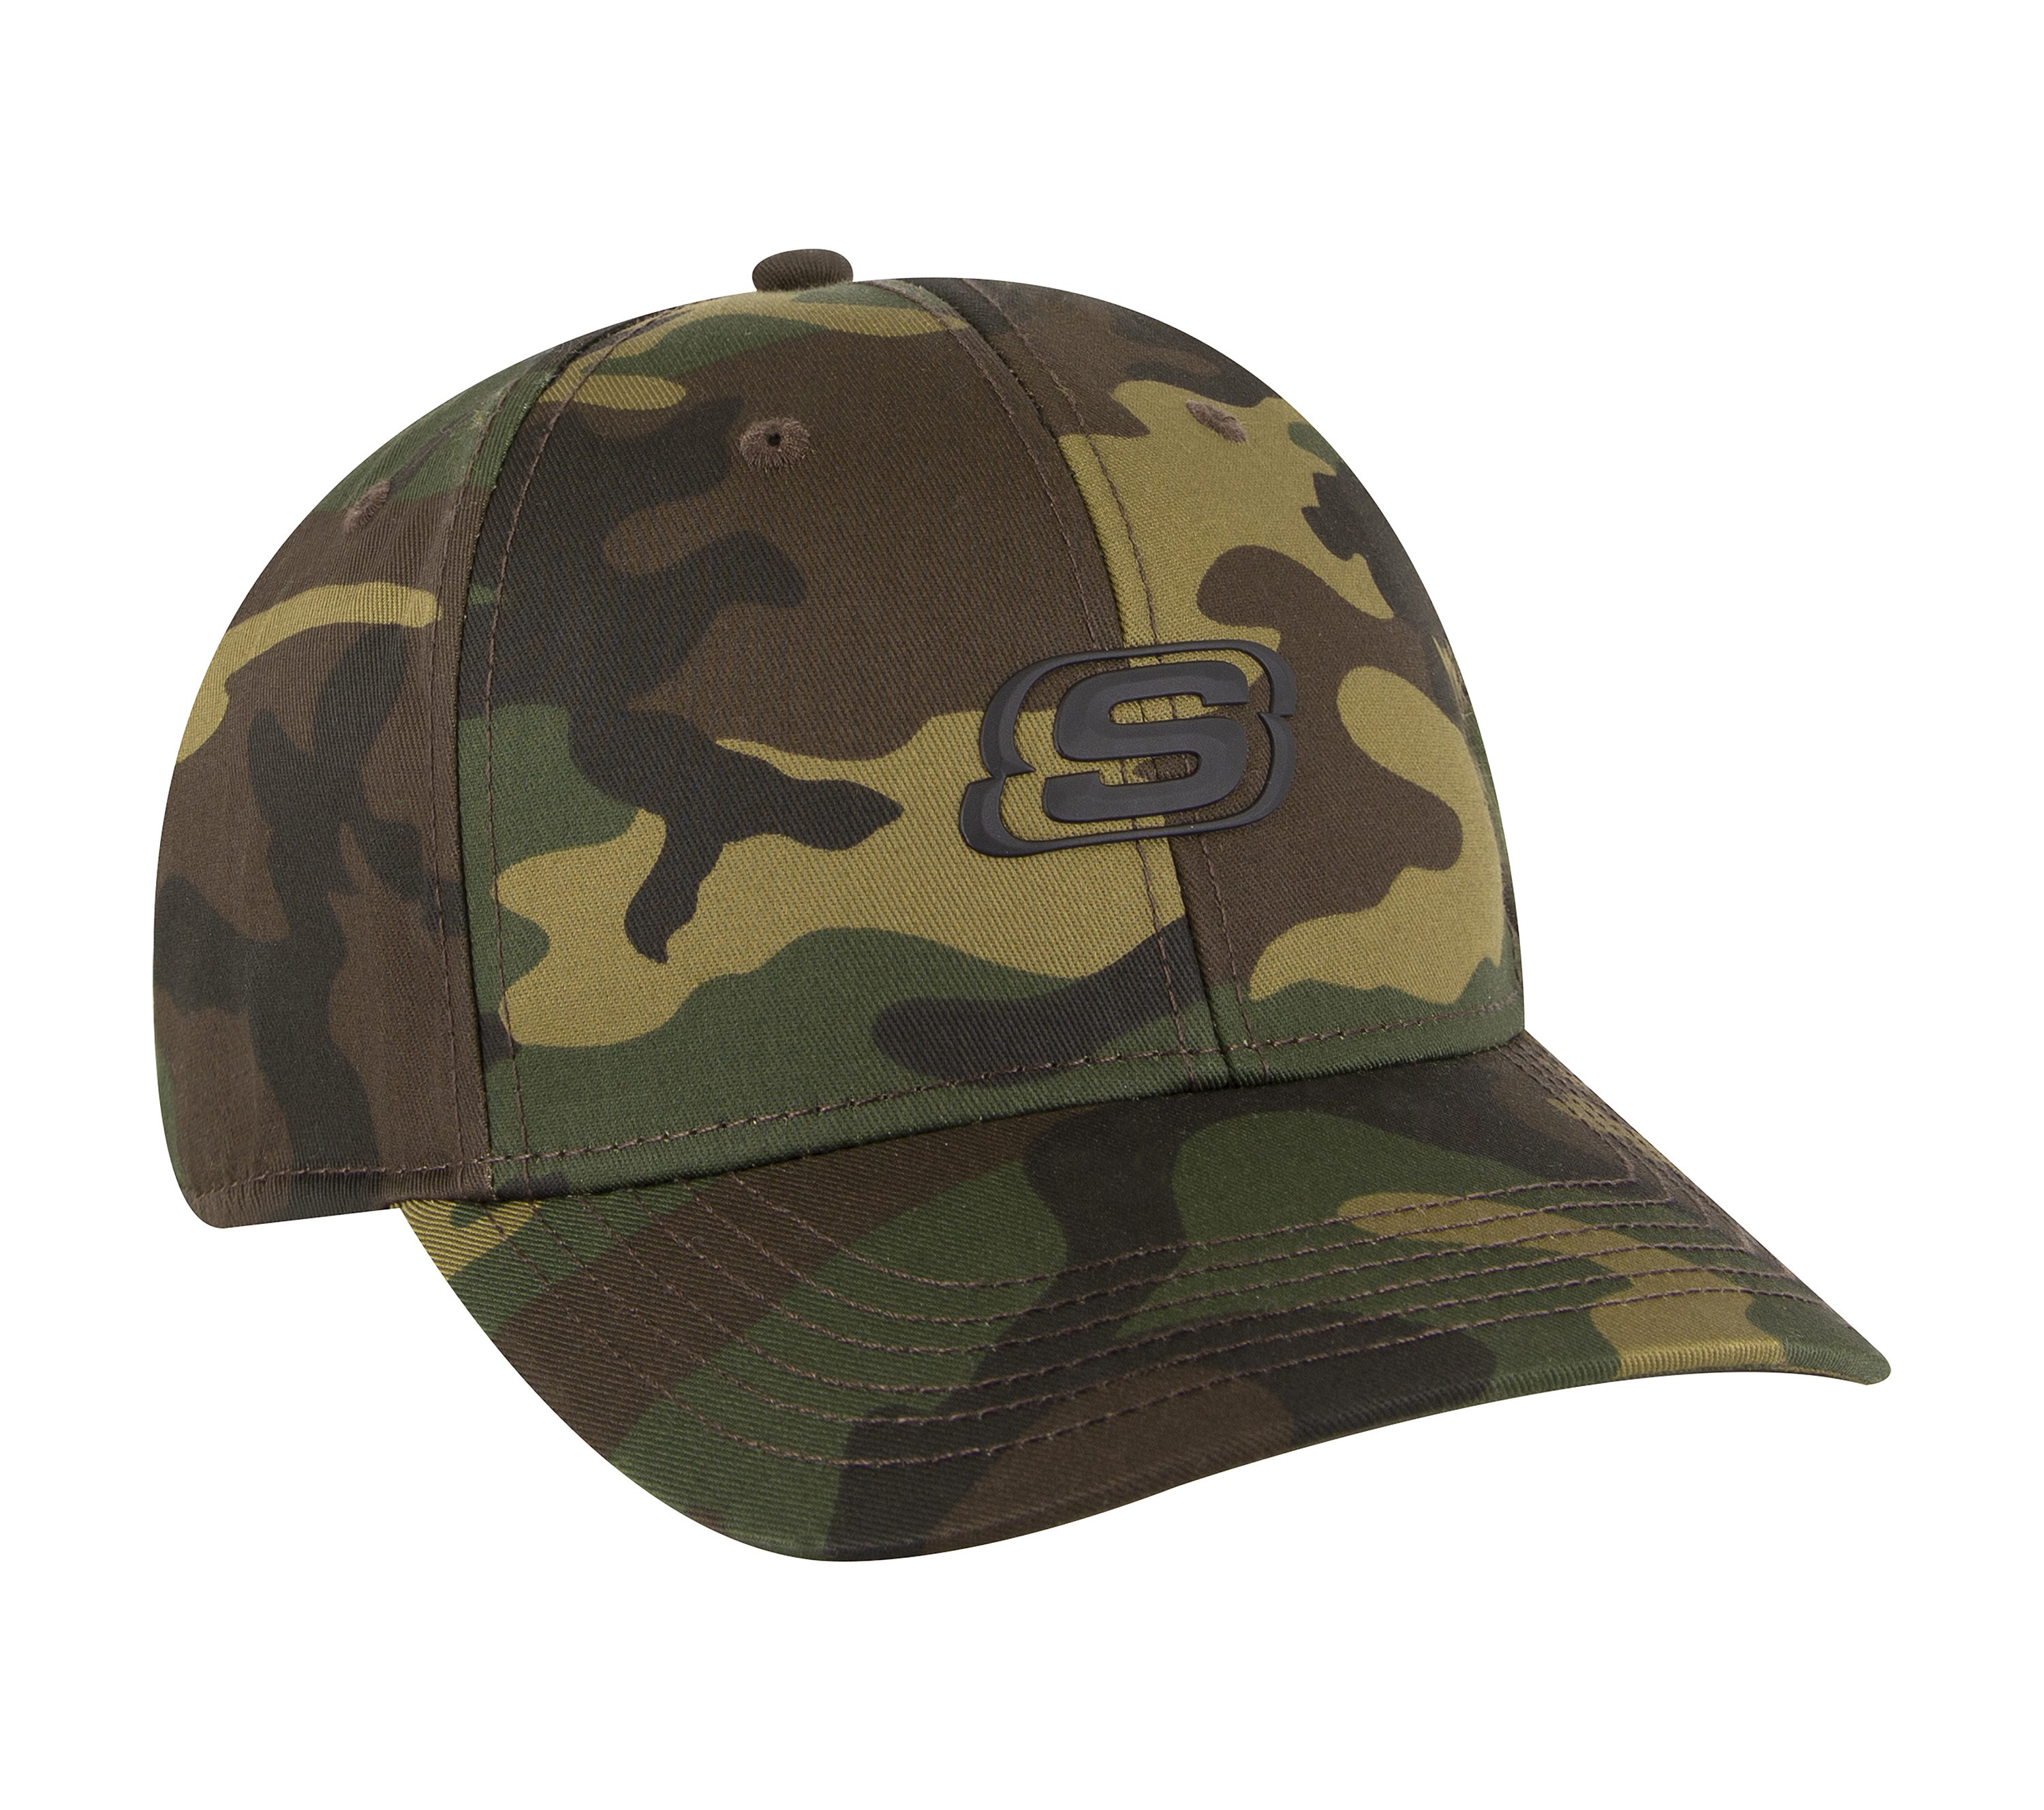 Skechers Men's Accessories Camo Hat | Camouflage | Polyester/Cotton